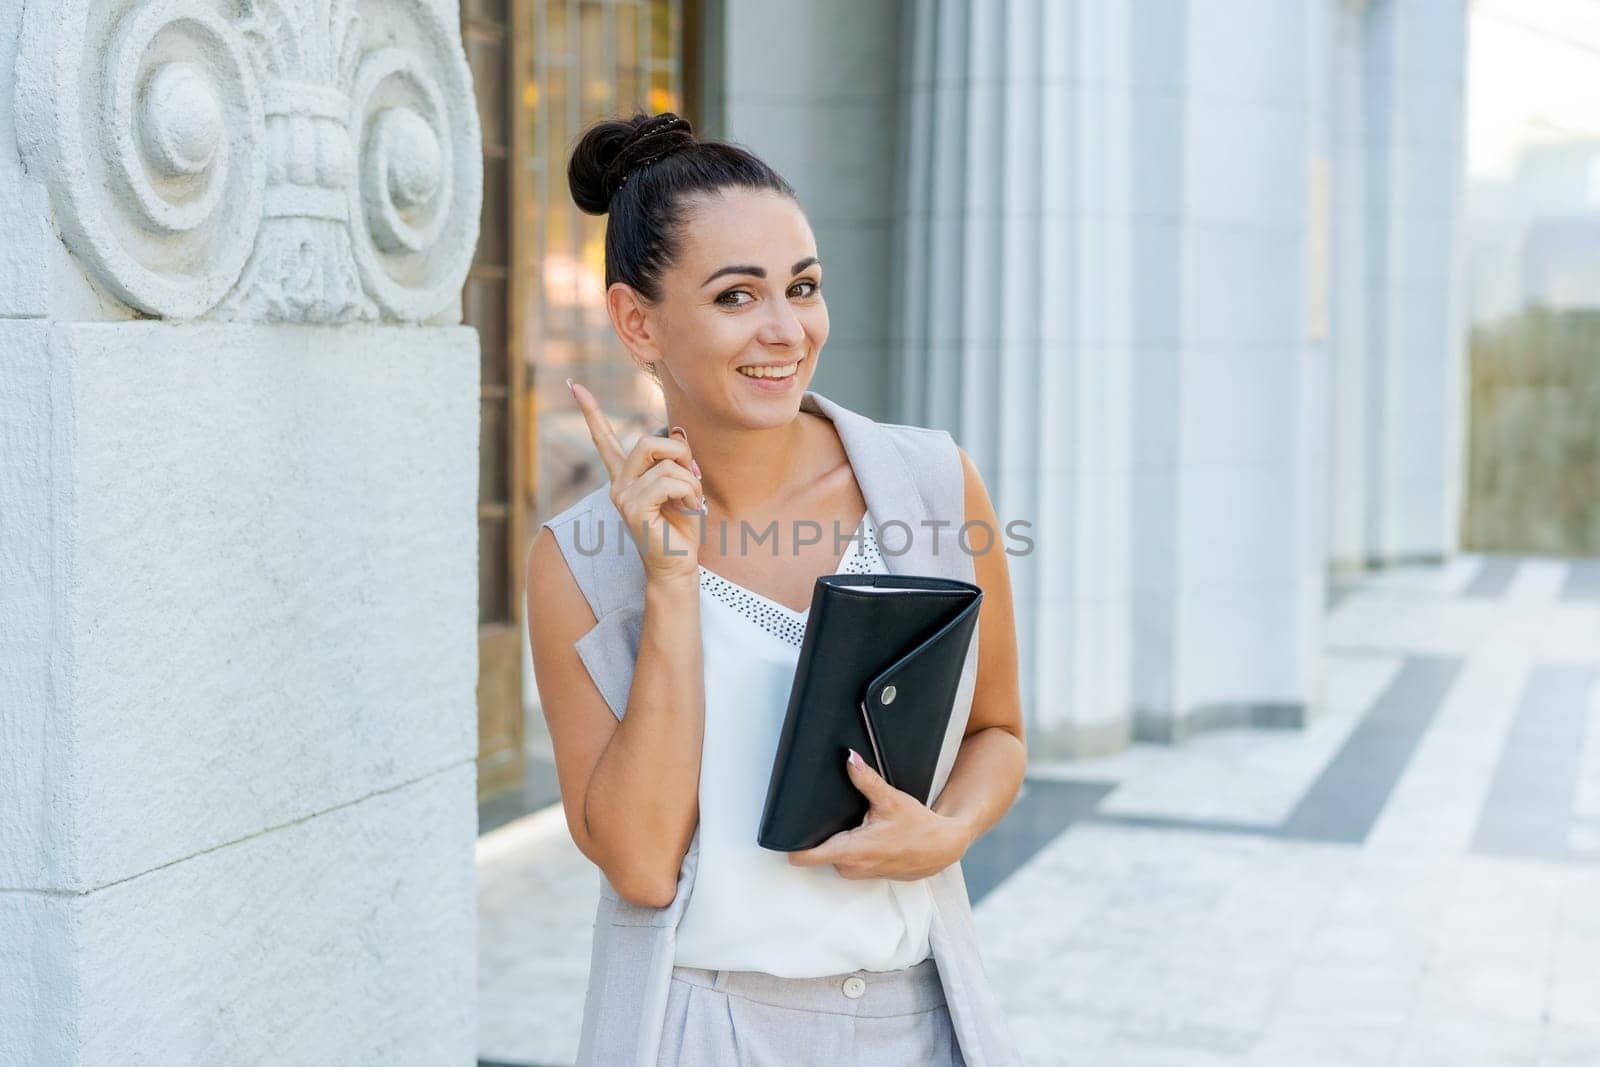 Successful businessman or entrepreneur smiling holding notepad while walking outdoor. City business woman working.